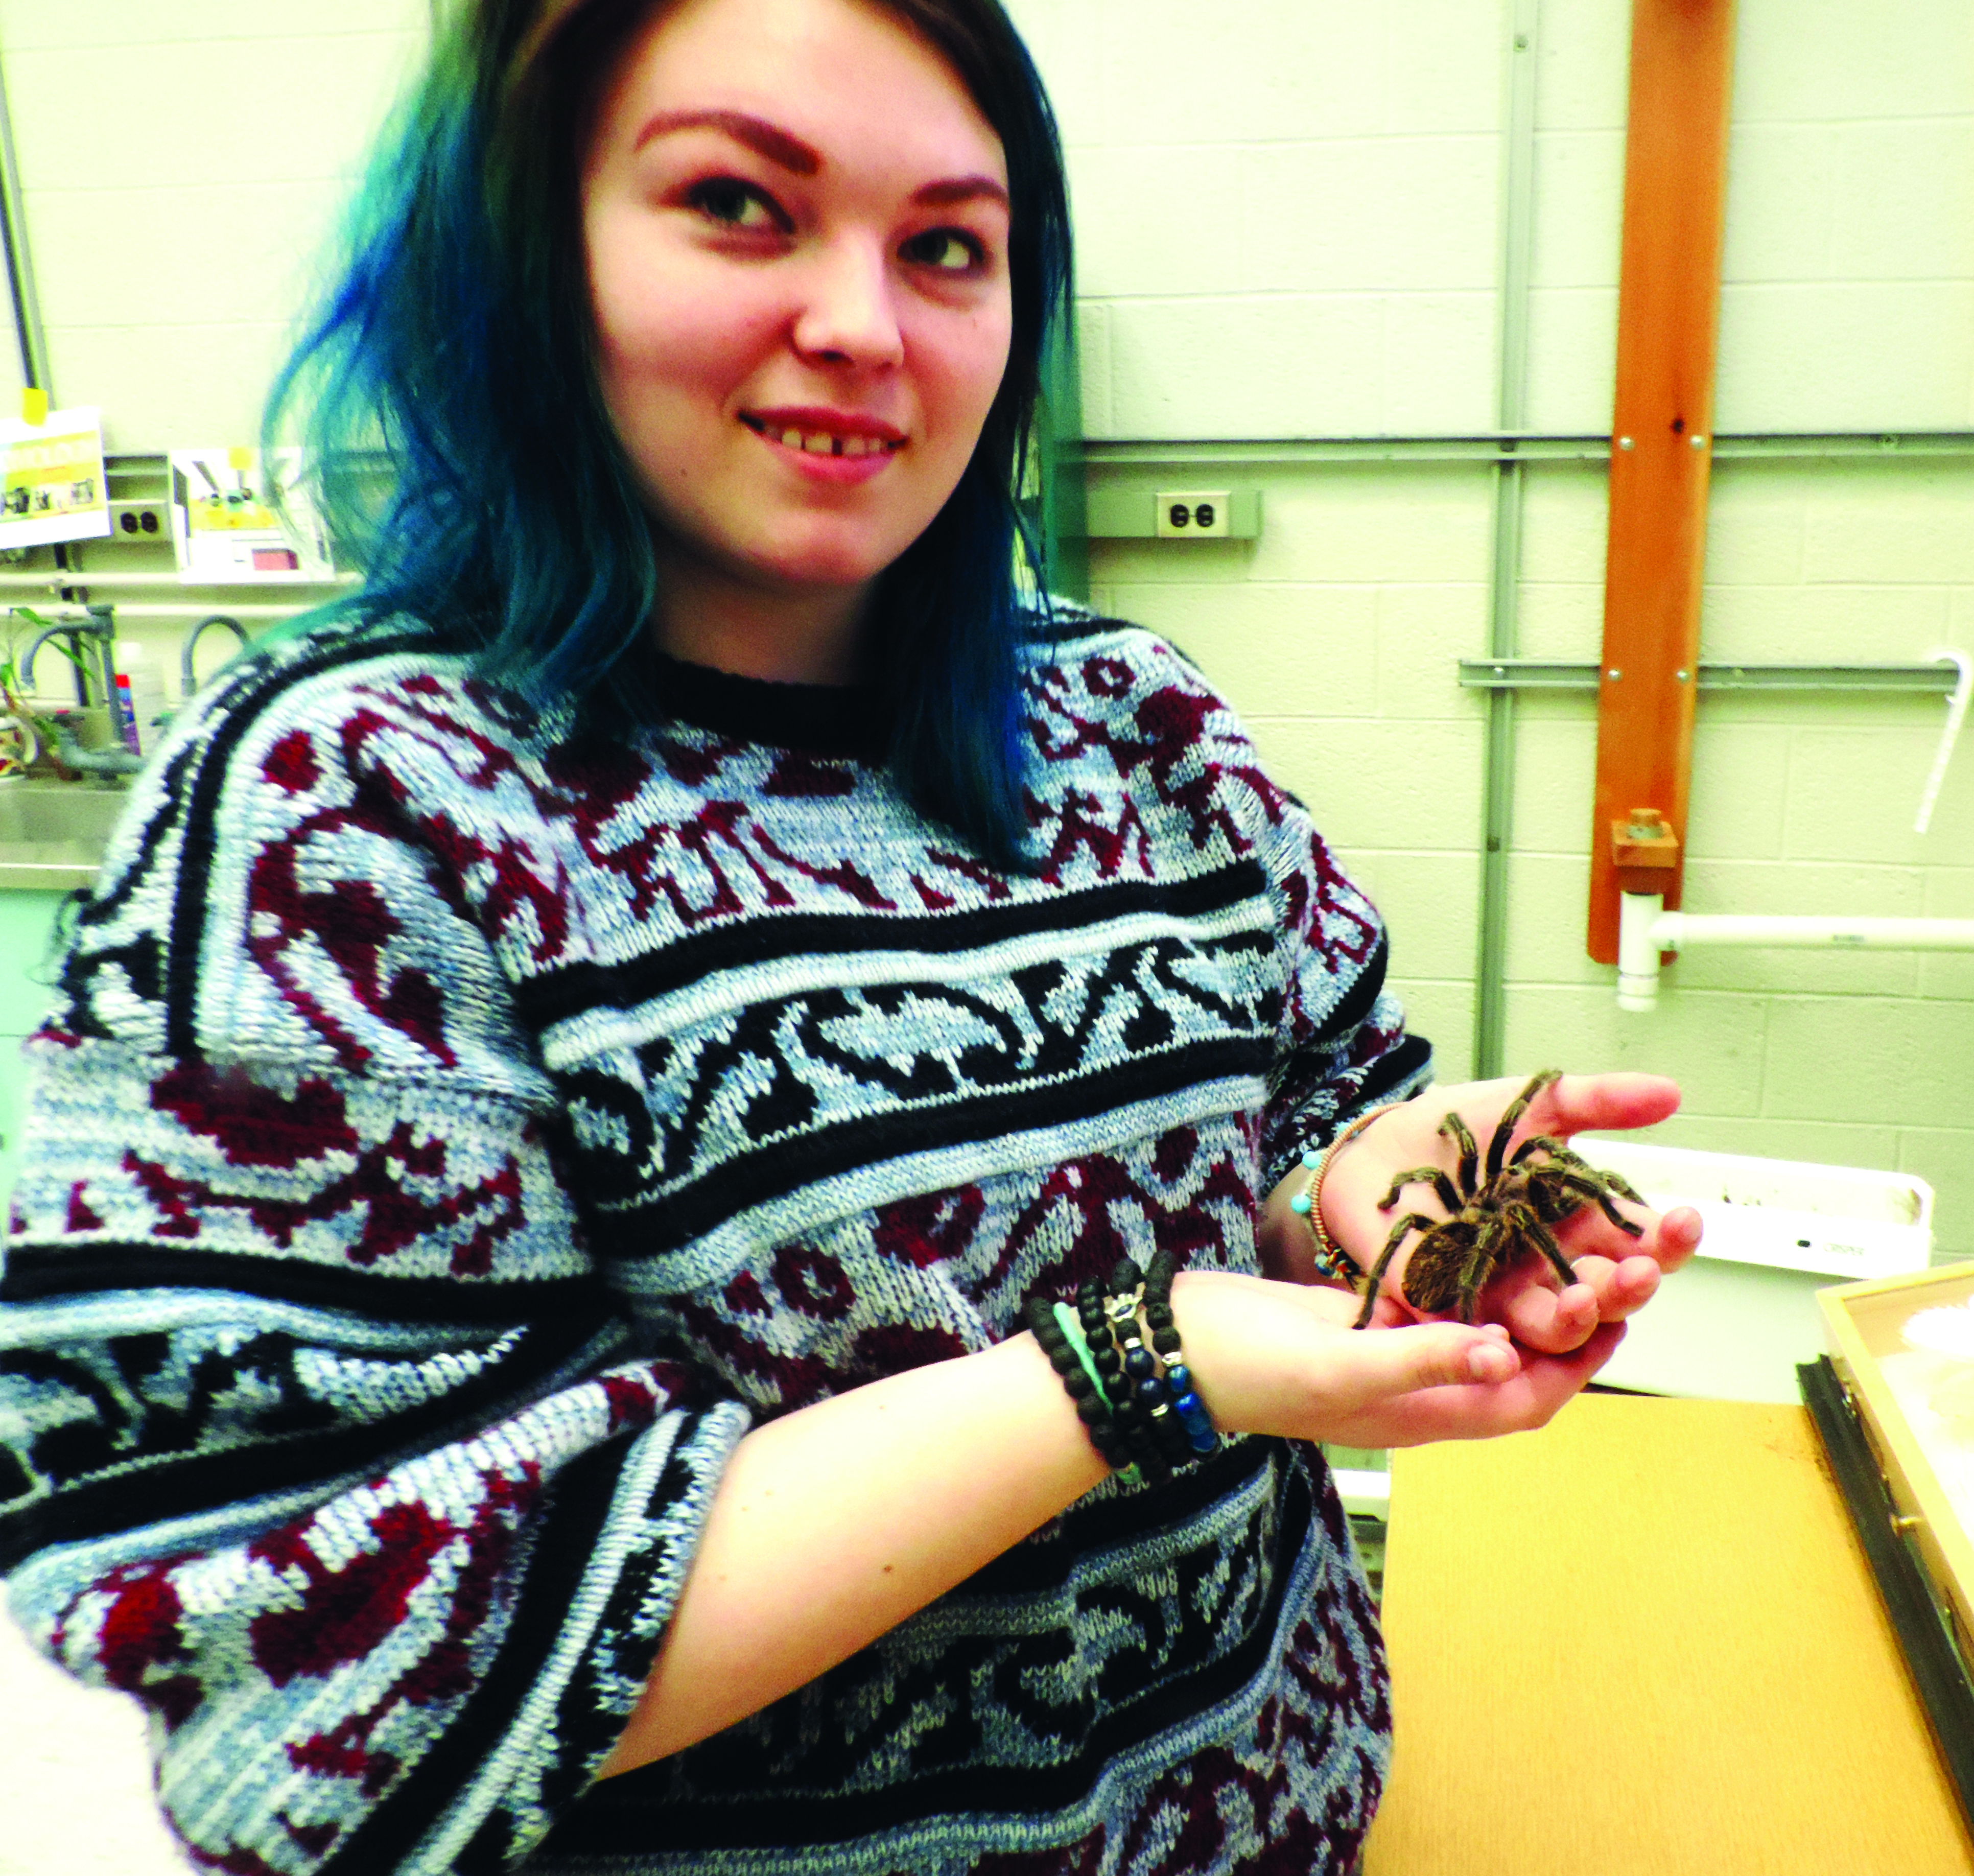 Job involves reaching out with a lot of exotic insects